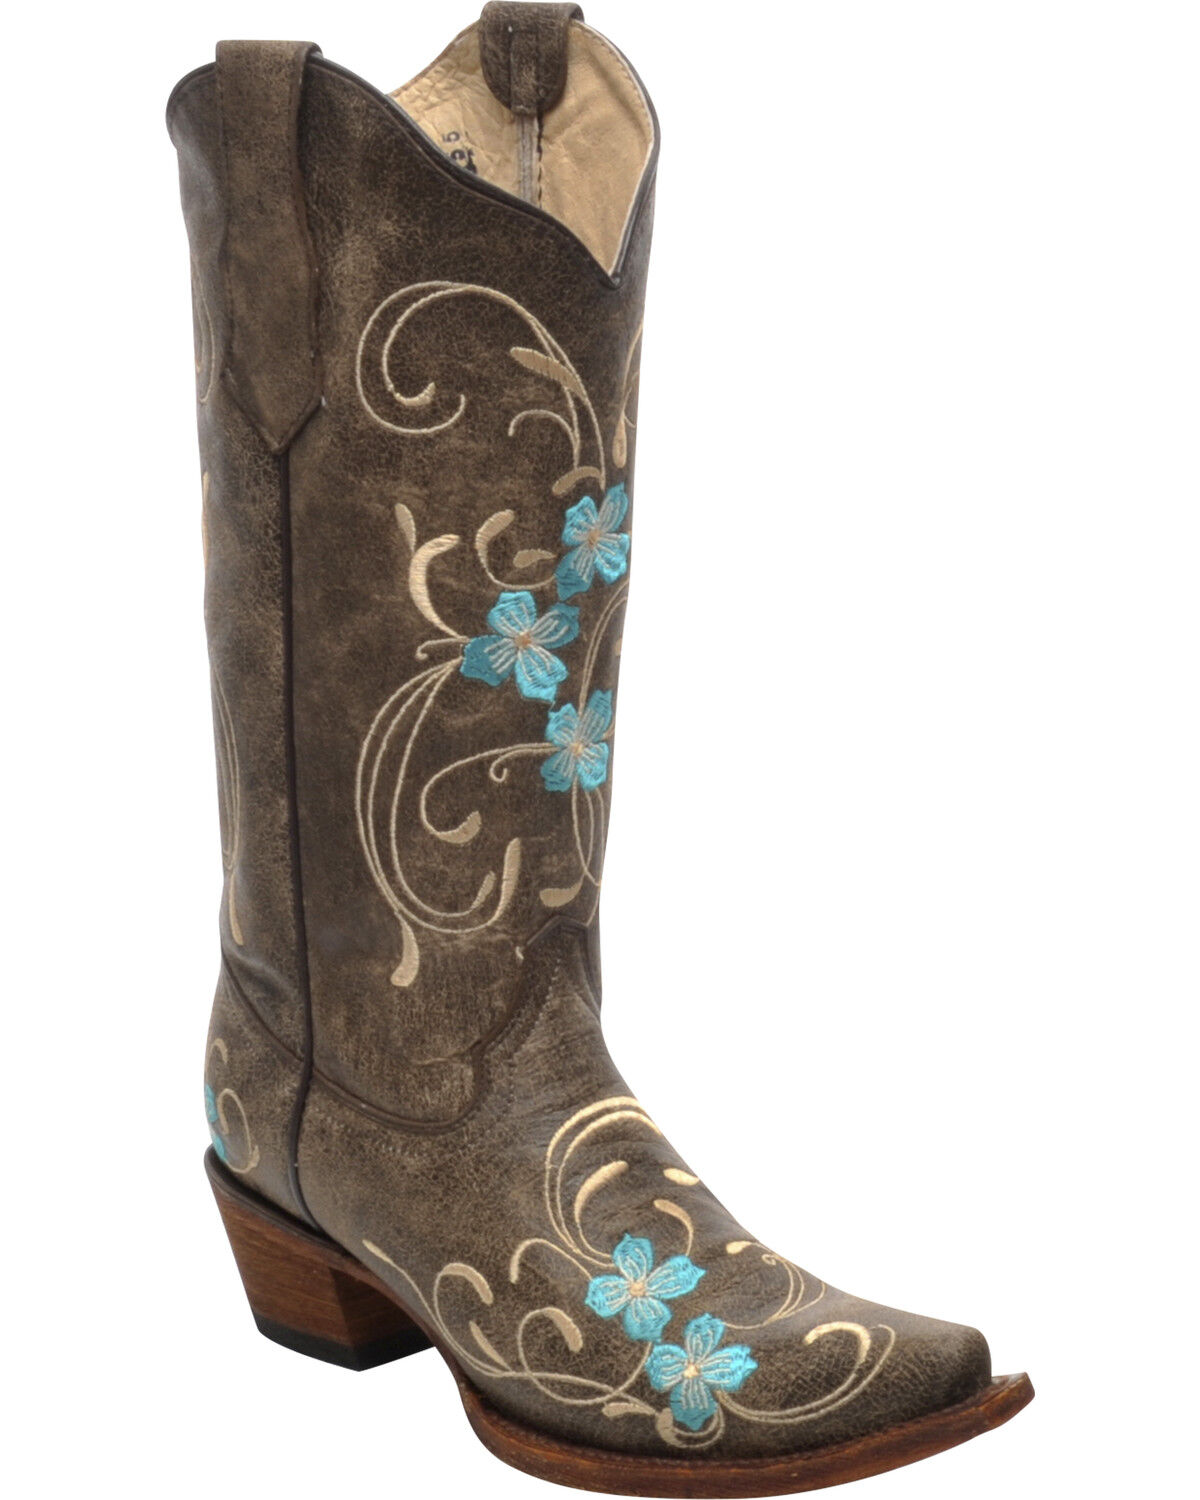 Womens Circle G Boots Corral Western Embroidered  Distressed Brown L5087 